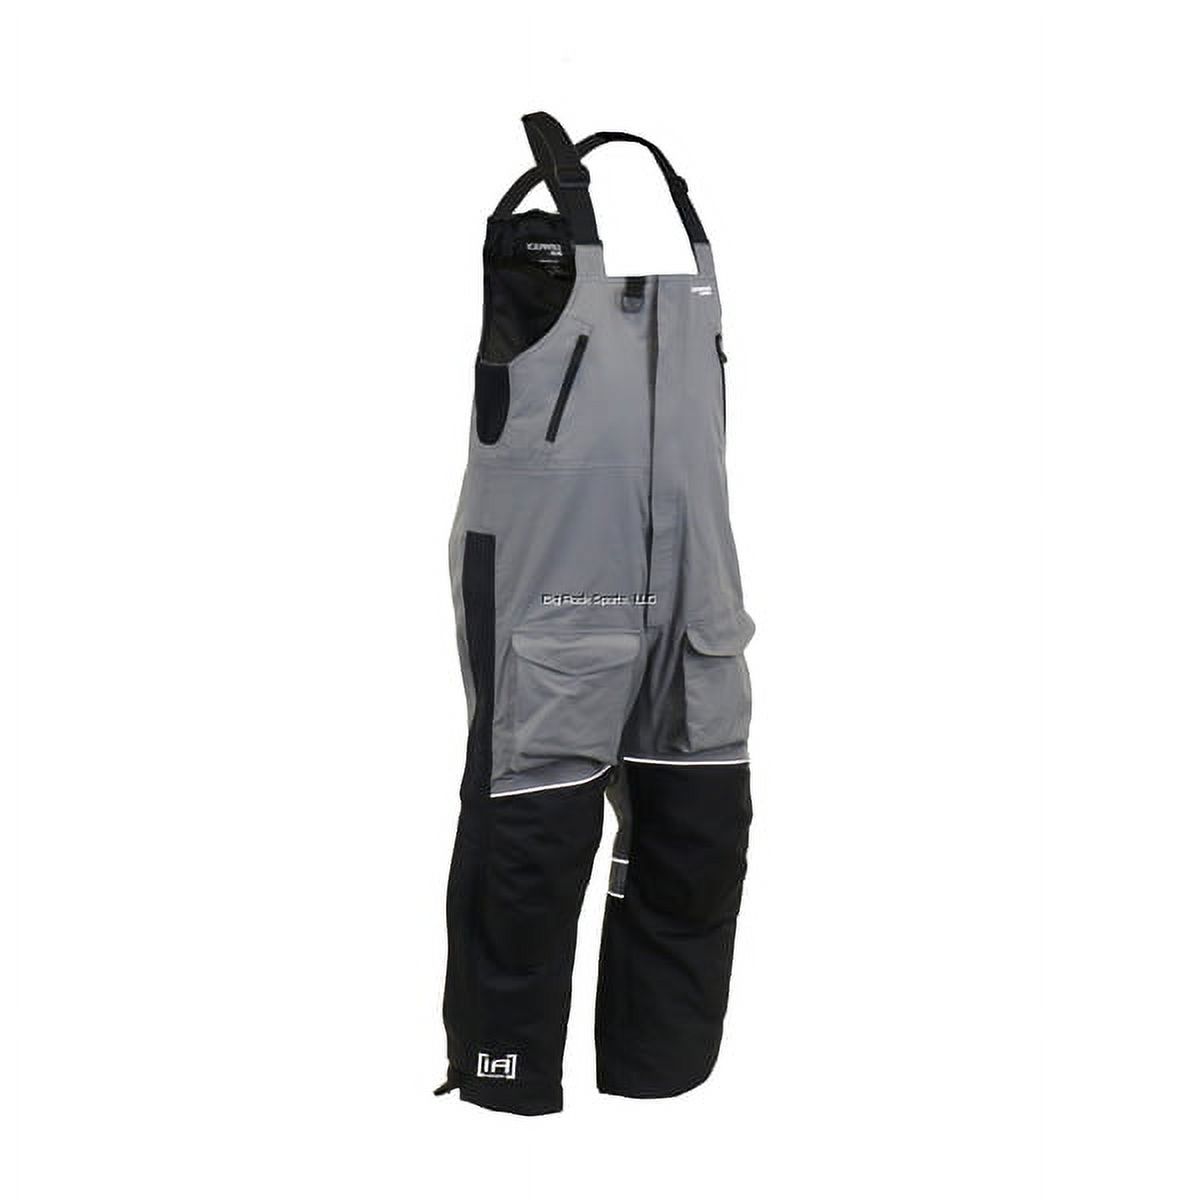 Clam Outdoors Ice Armor Ascent Float Bib - Med - image 1 of 1